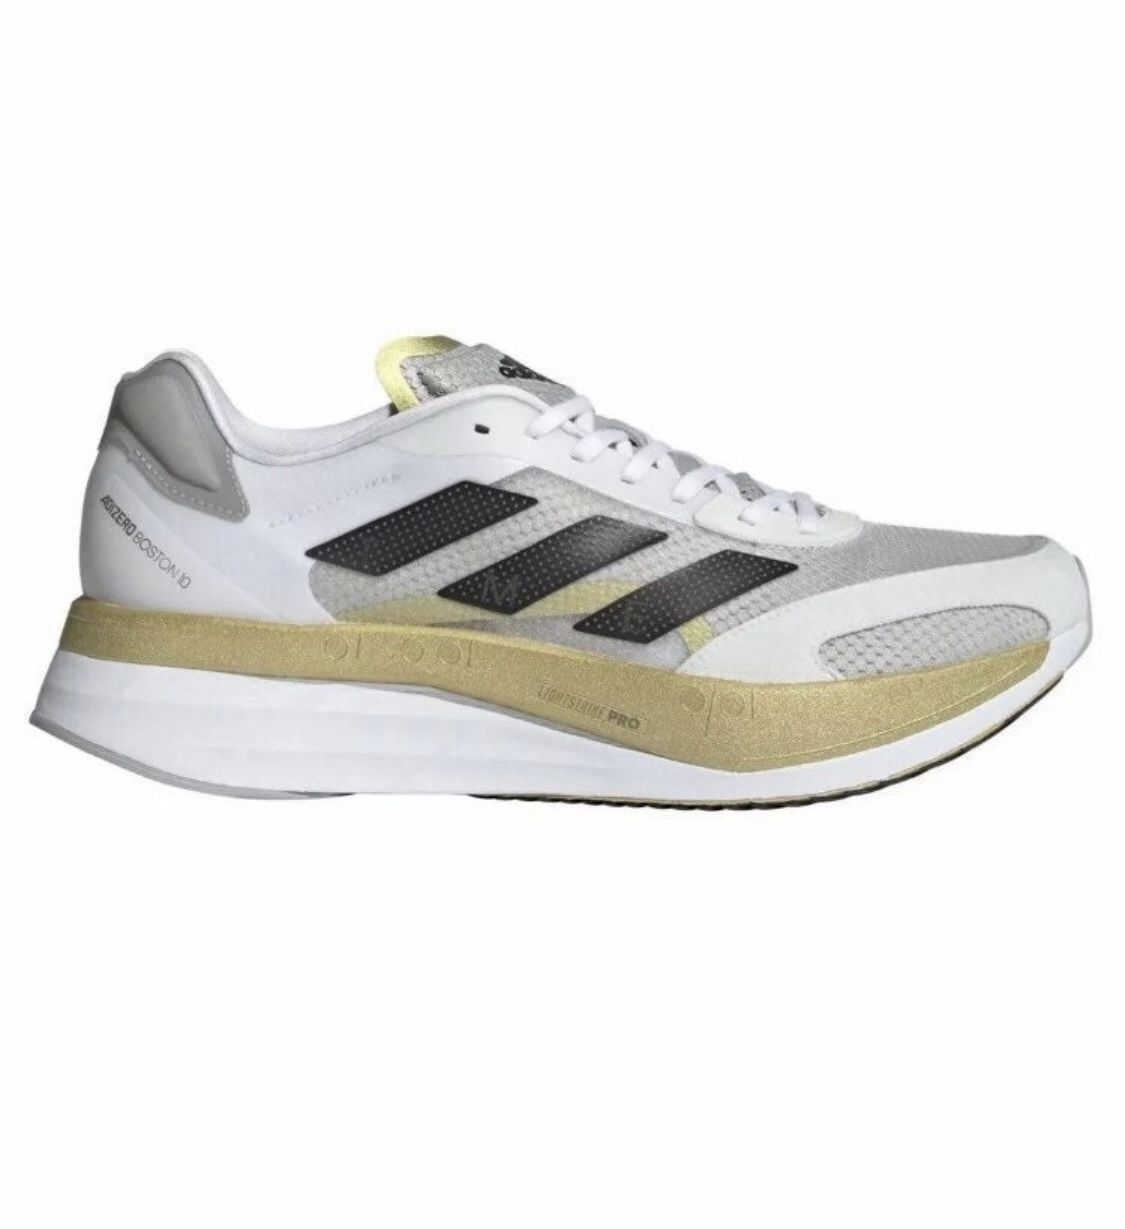 Adidas Adizero Boston TME Running Training Shoes Men's  White Gold GY4929 New with box without lid.